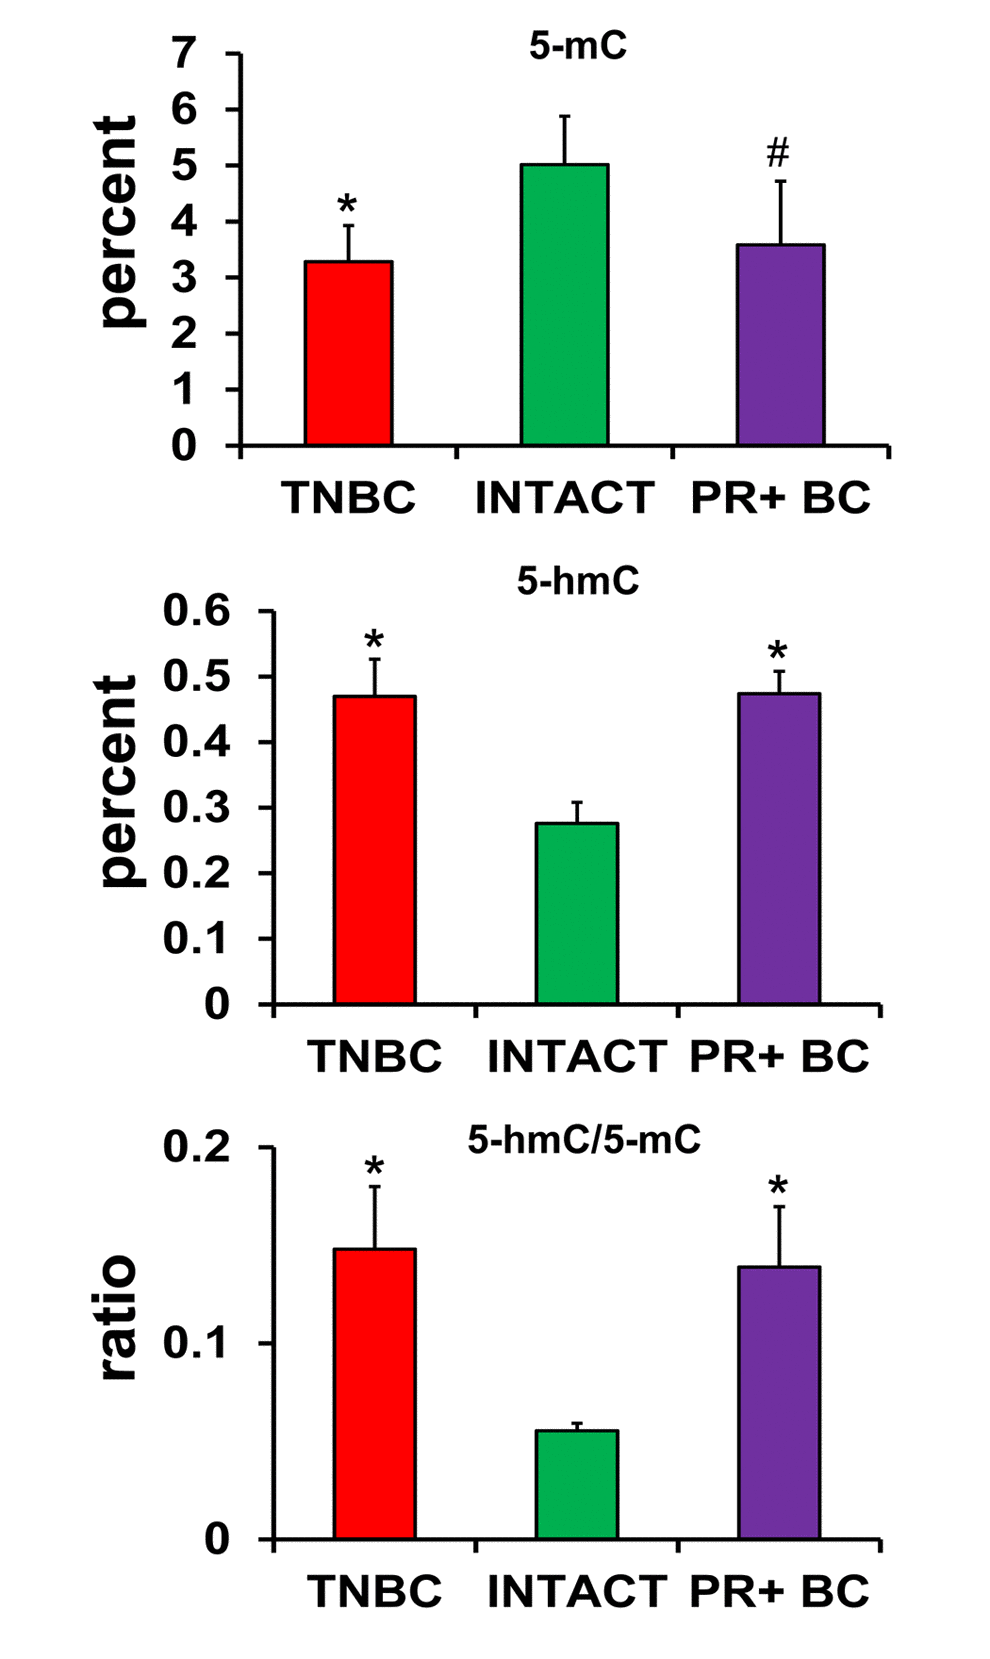 Levels of 5-mC and 5-hmC and ratio of 5-hmC/5-mC in the genomic DNA of PFC tissues of intact and TNBC and PR+BC-bearing TumorGraft mice. * p